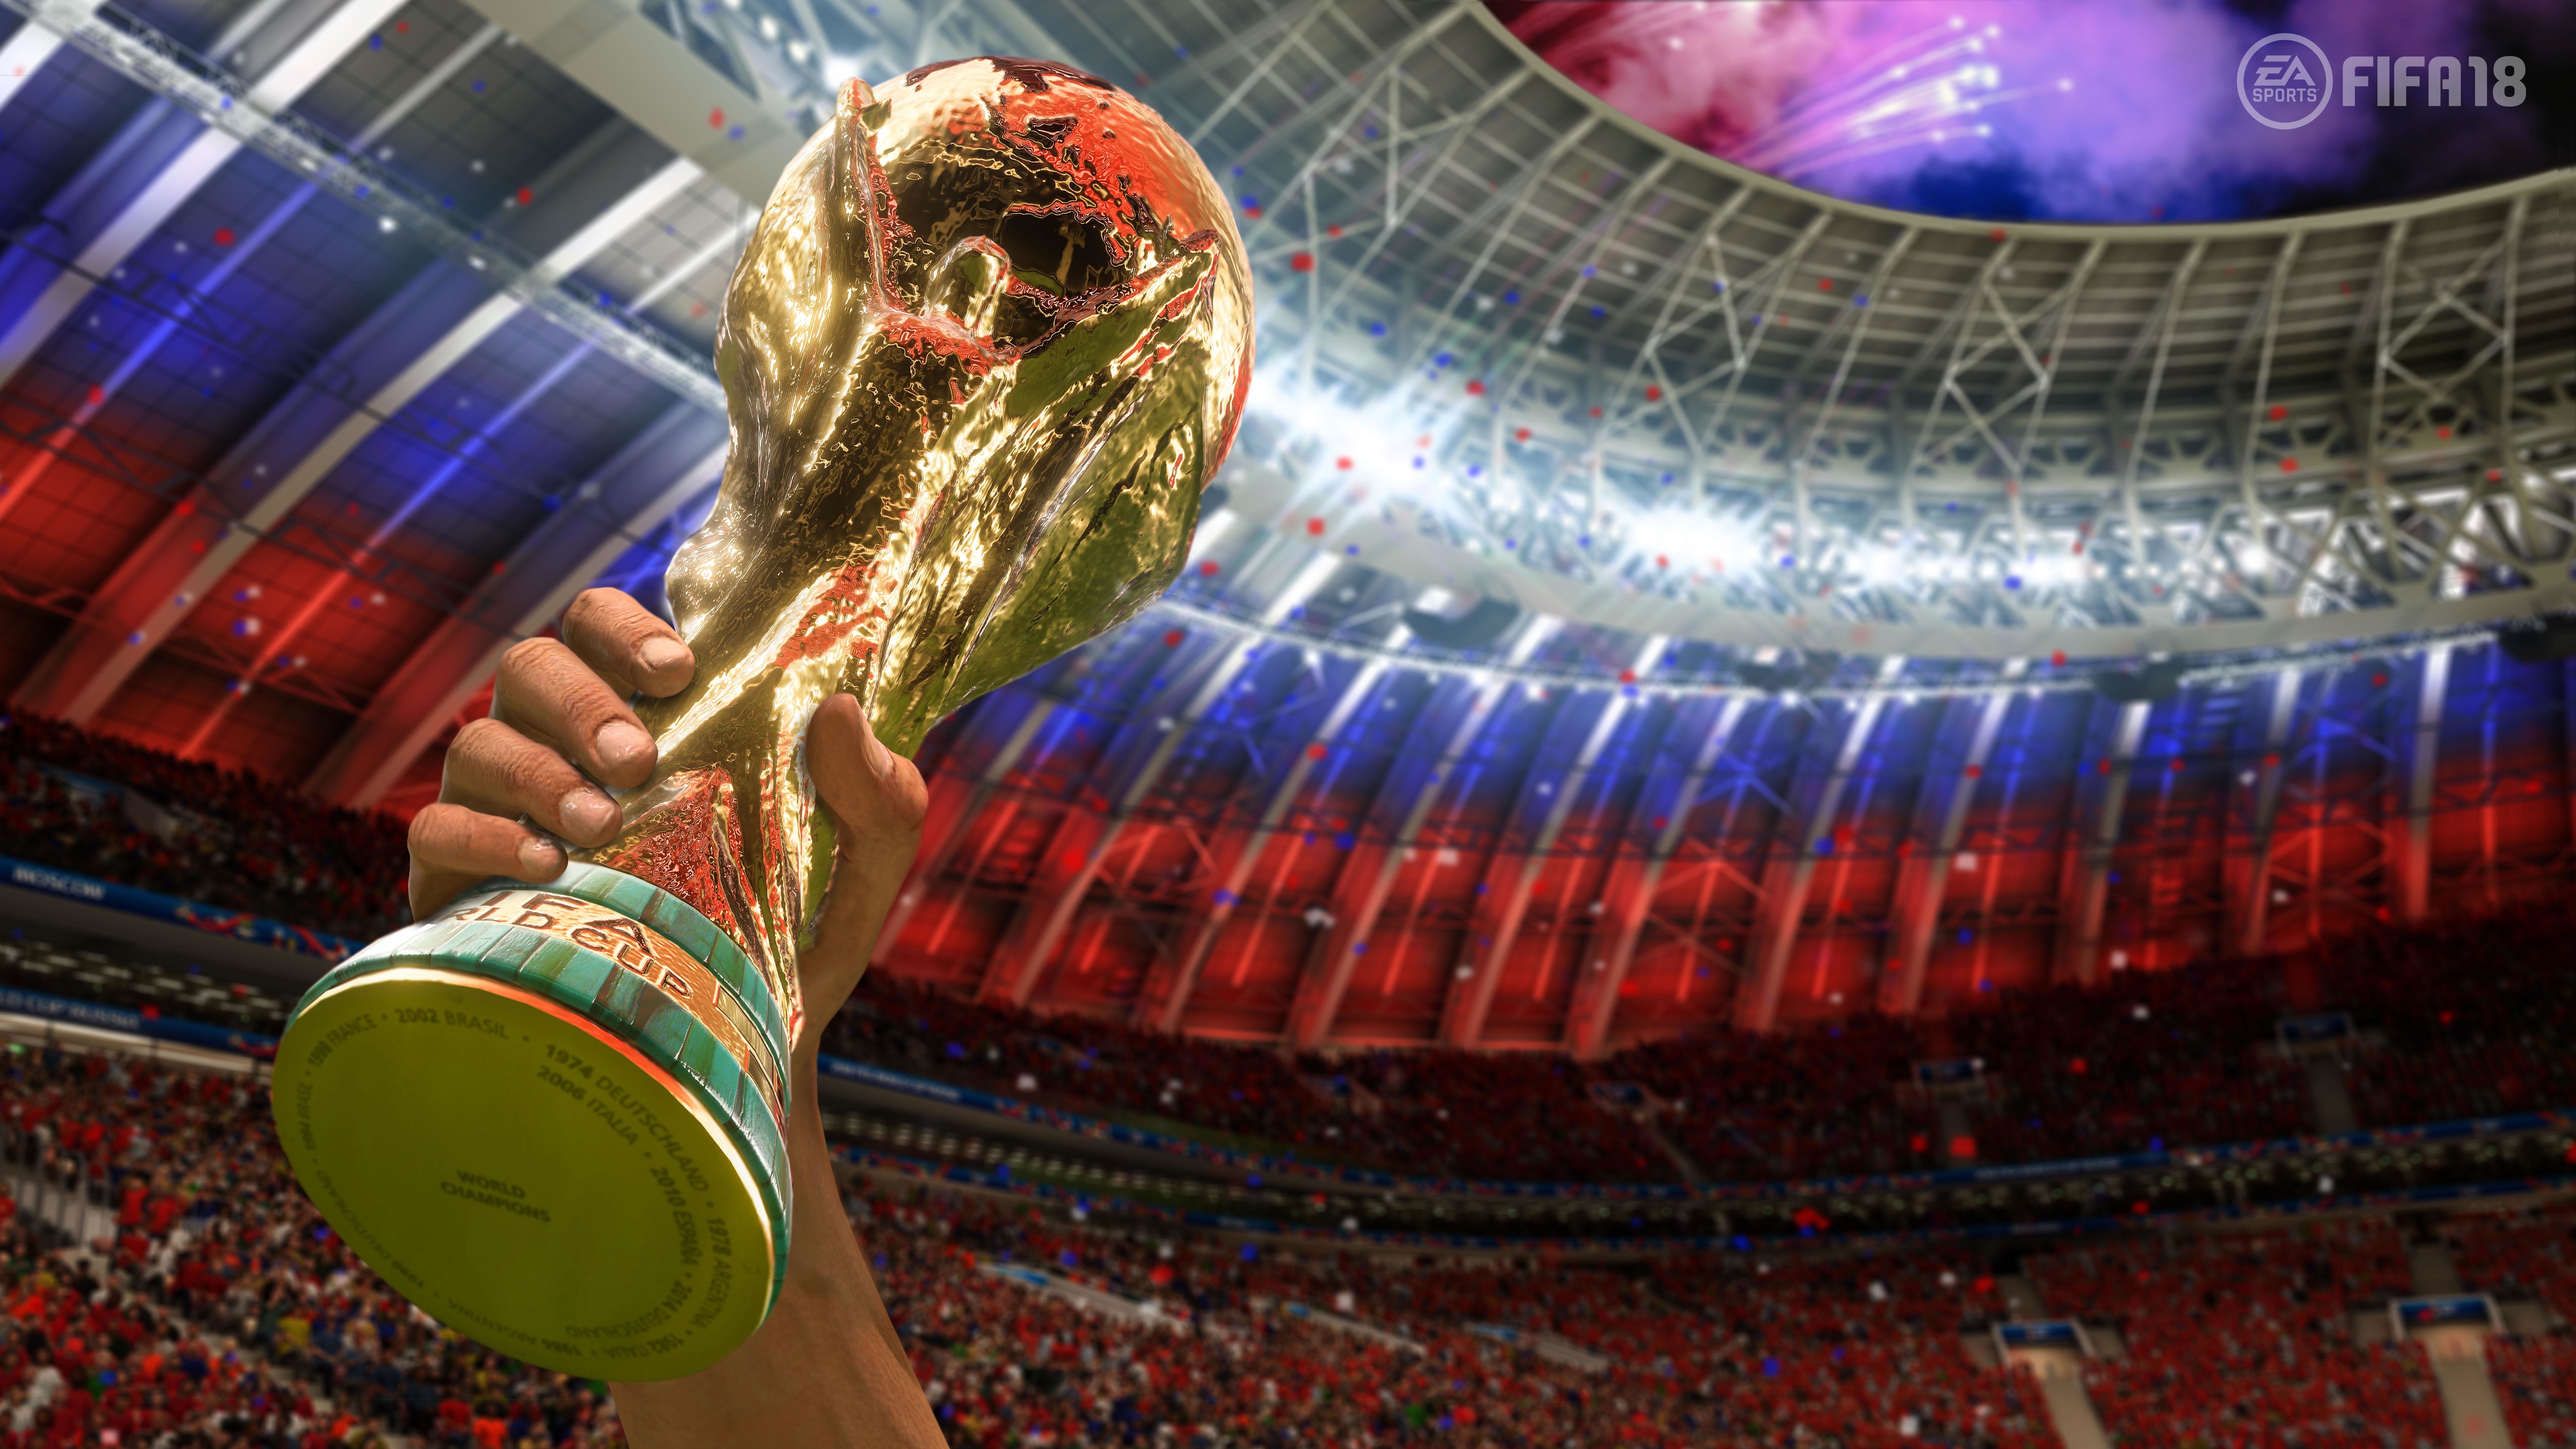 7680x4320 Fifa 18 Trophy 8k HD 4k Wallpapers, Images ...